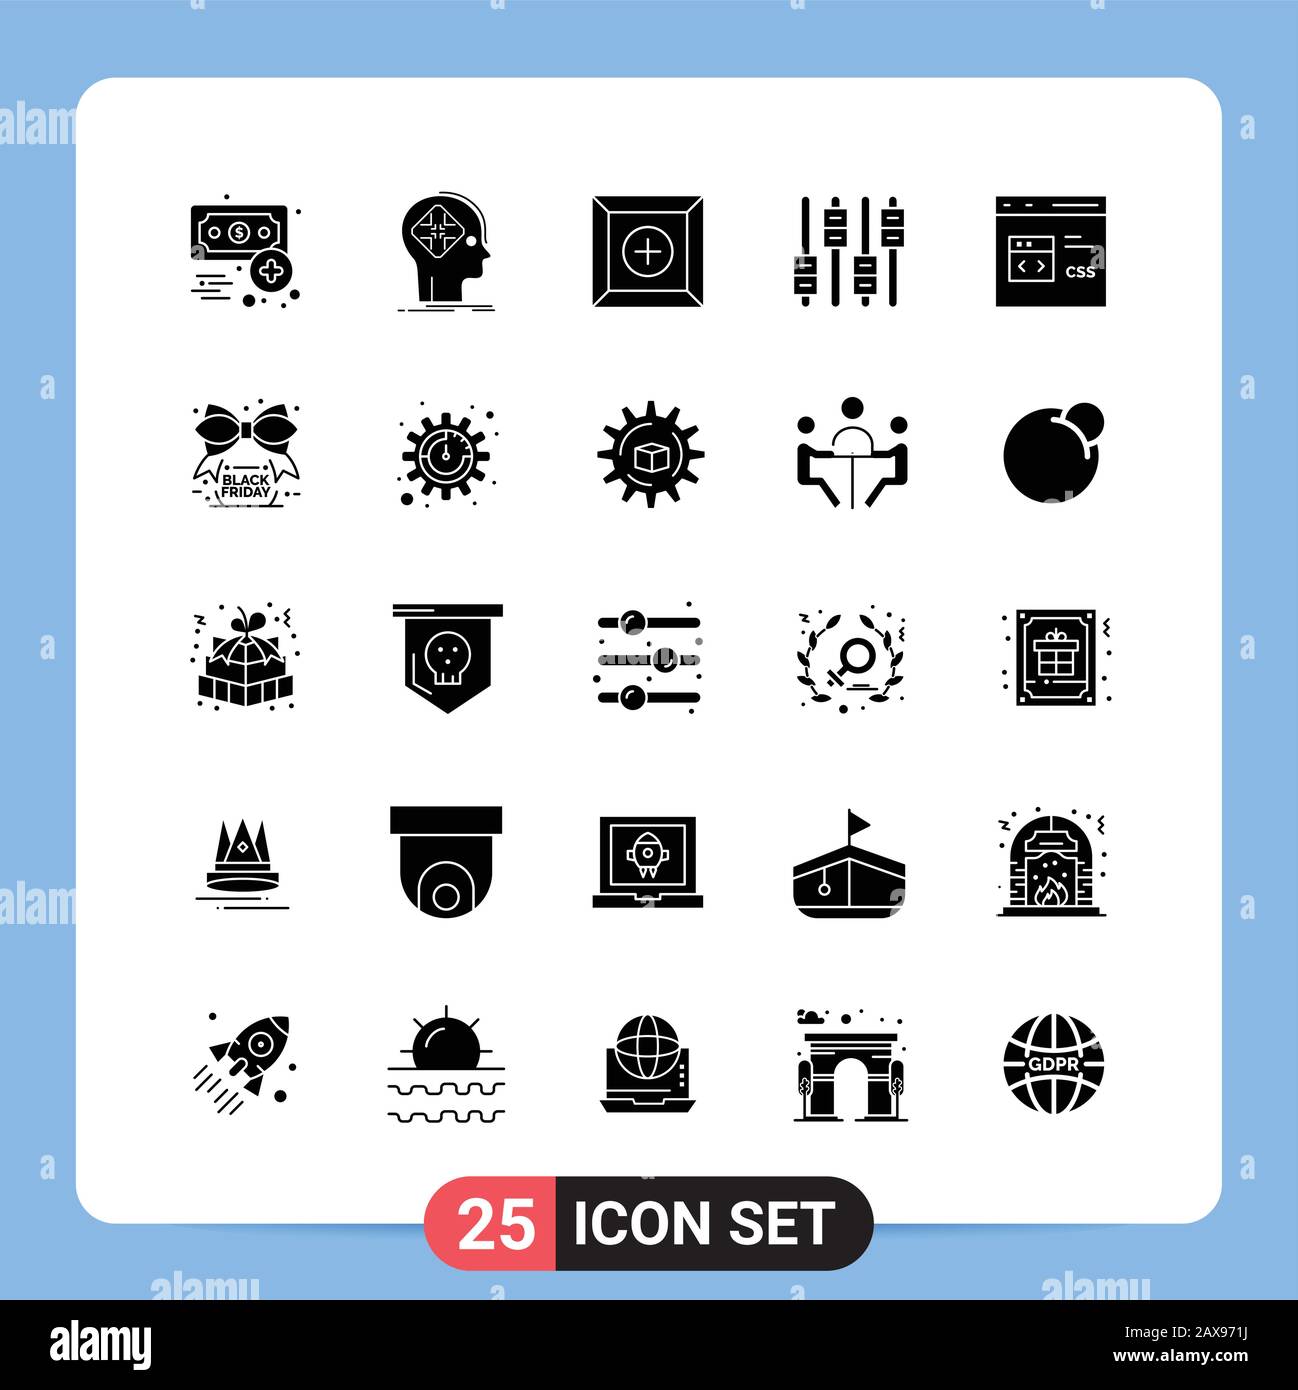 25 Solid Black Icon Pack Glyph Symbols for Mobile Apps isolated on ...